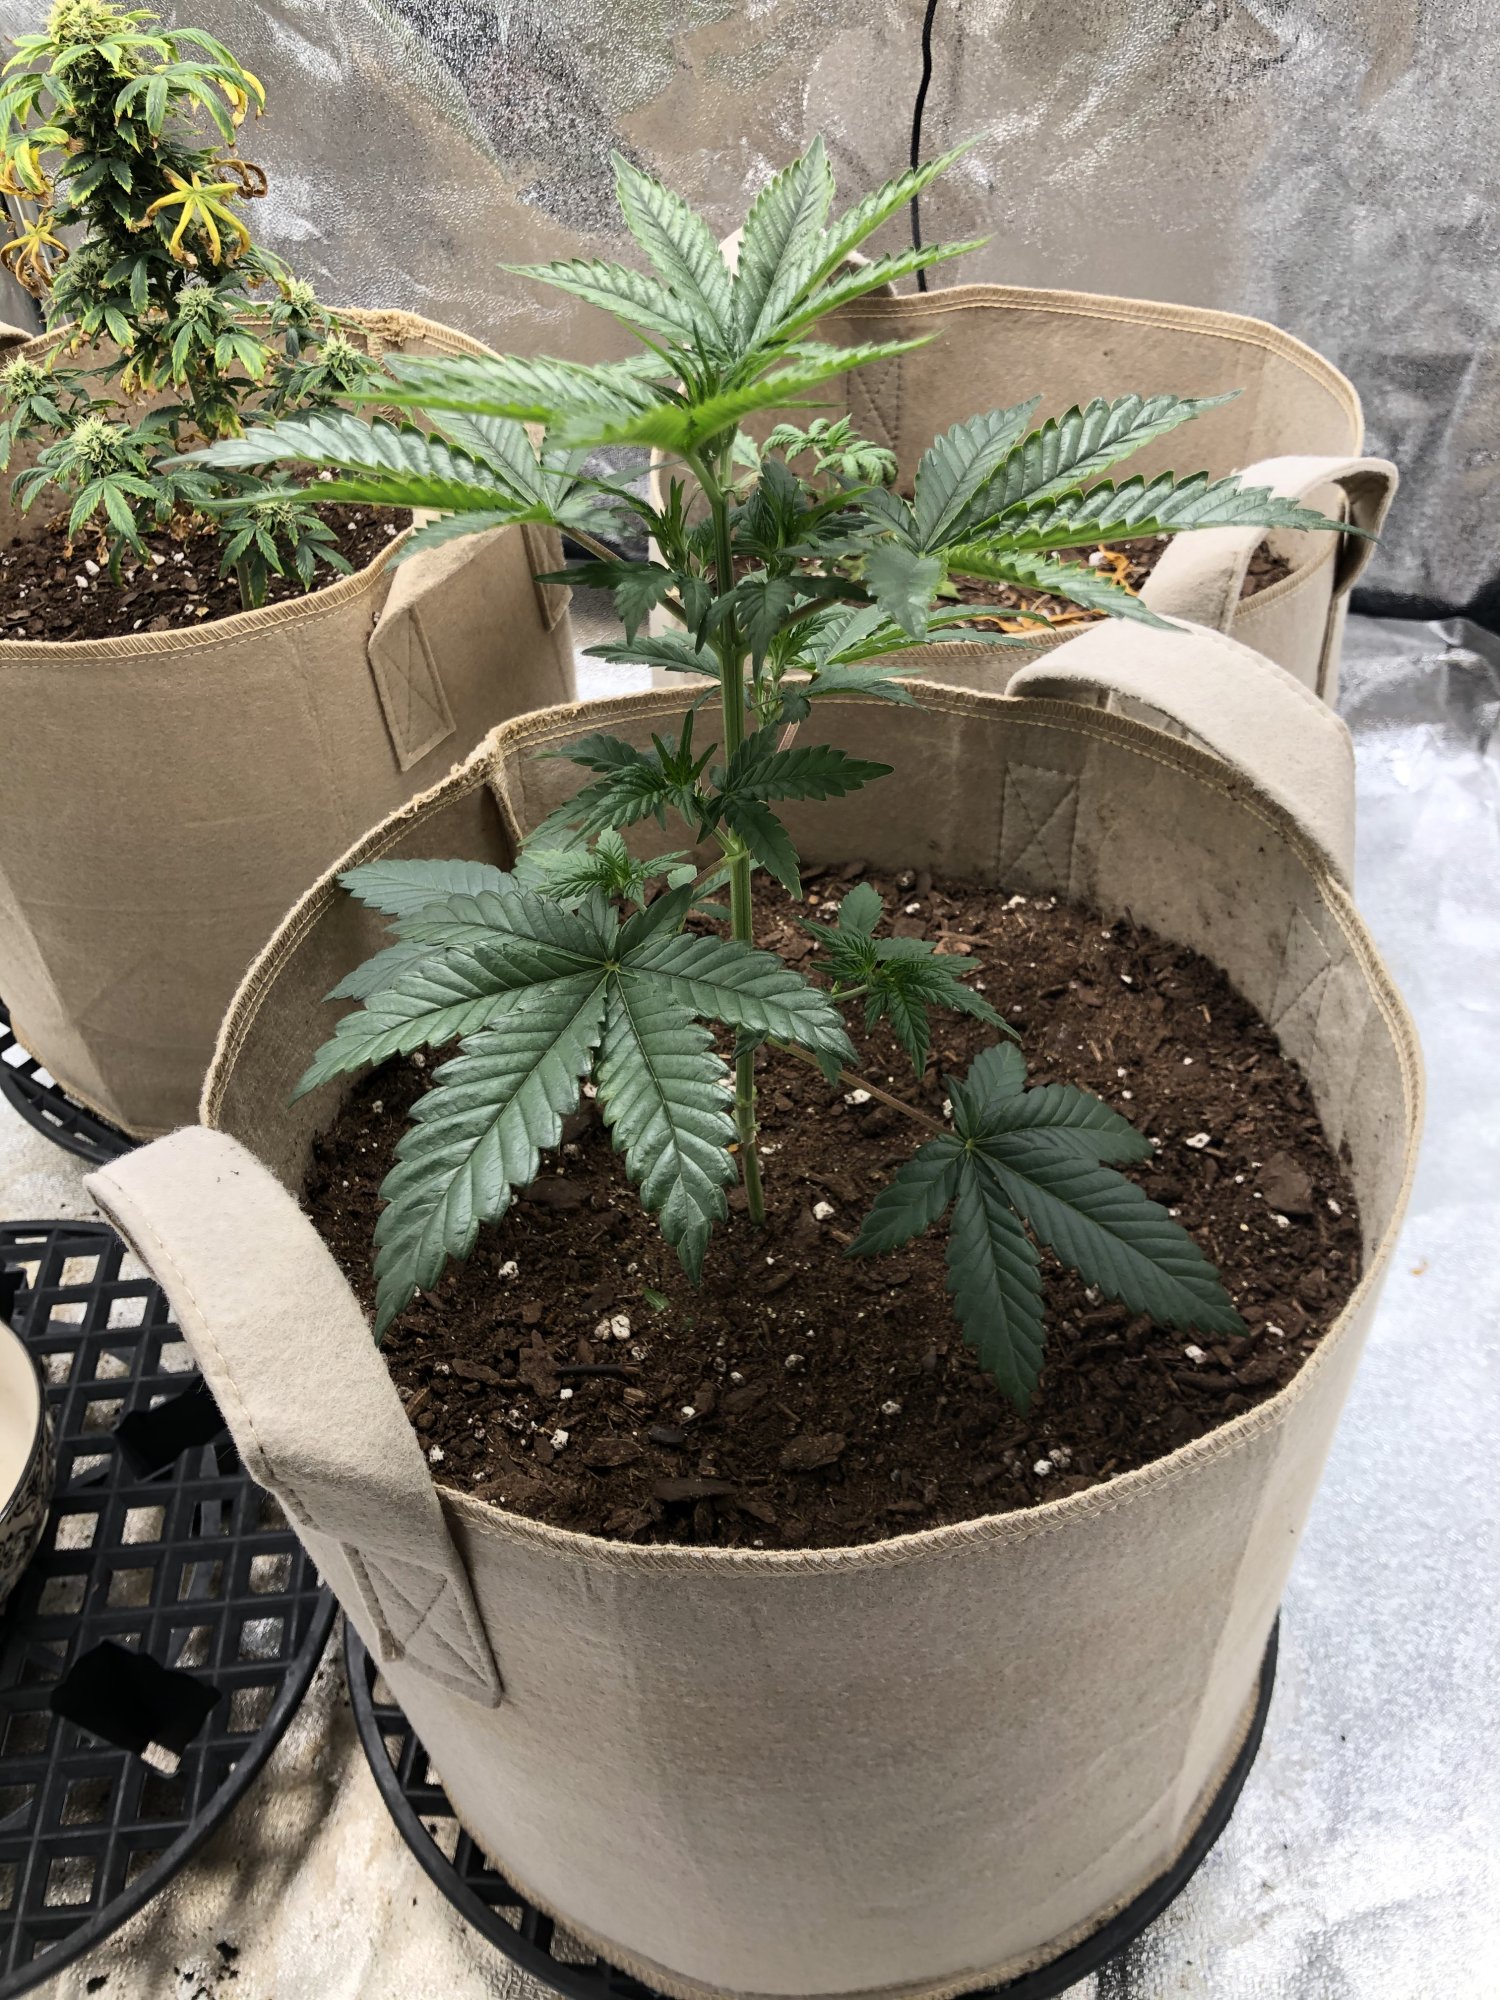 Is this plant showing the deficiencies